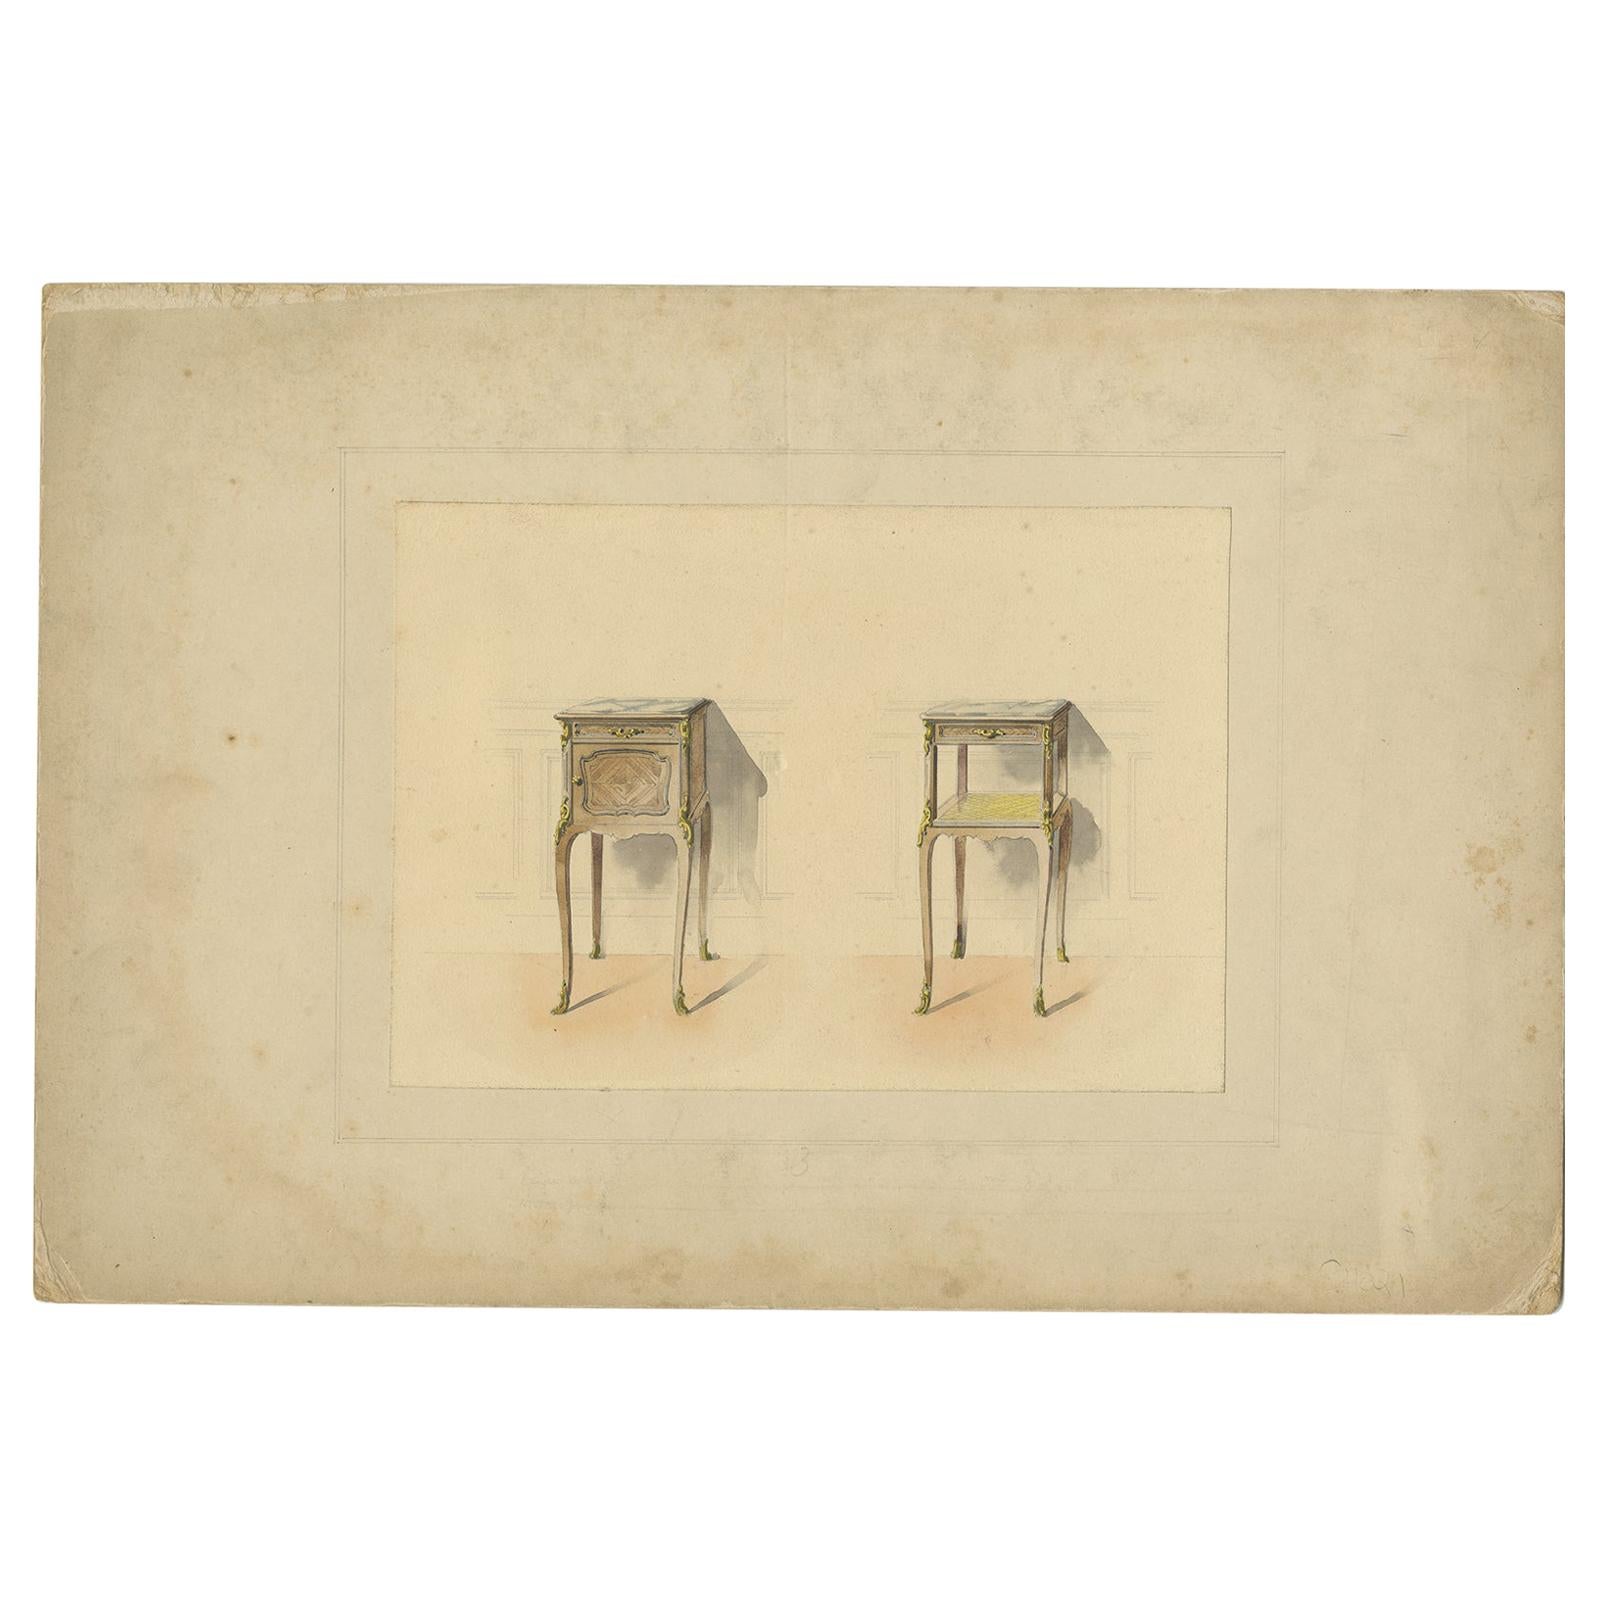 Antique Print of the Design of Two Sidetables/Furniture, circa 1900